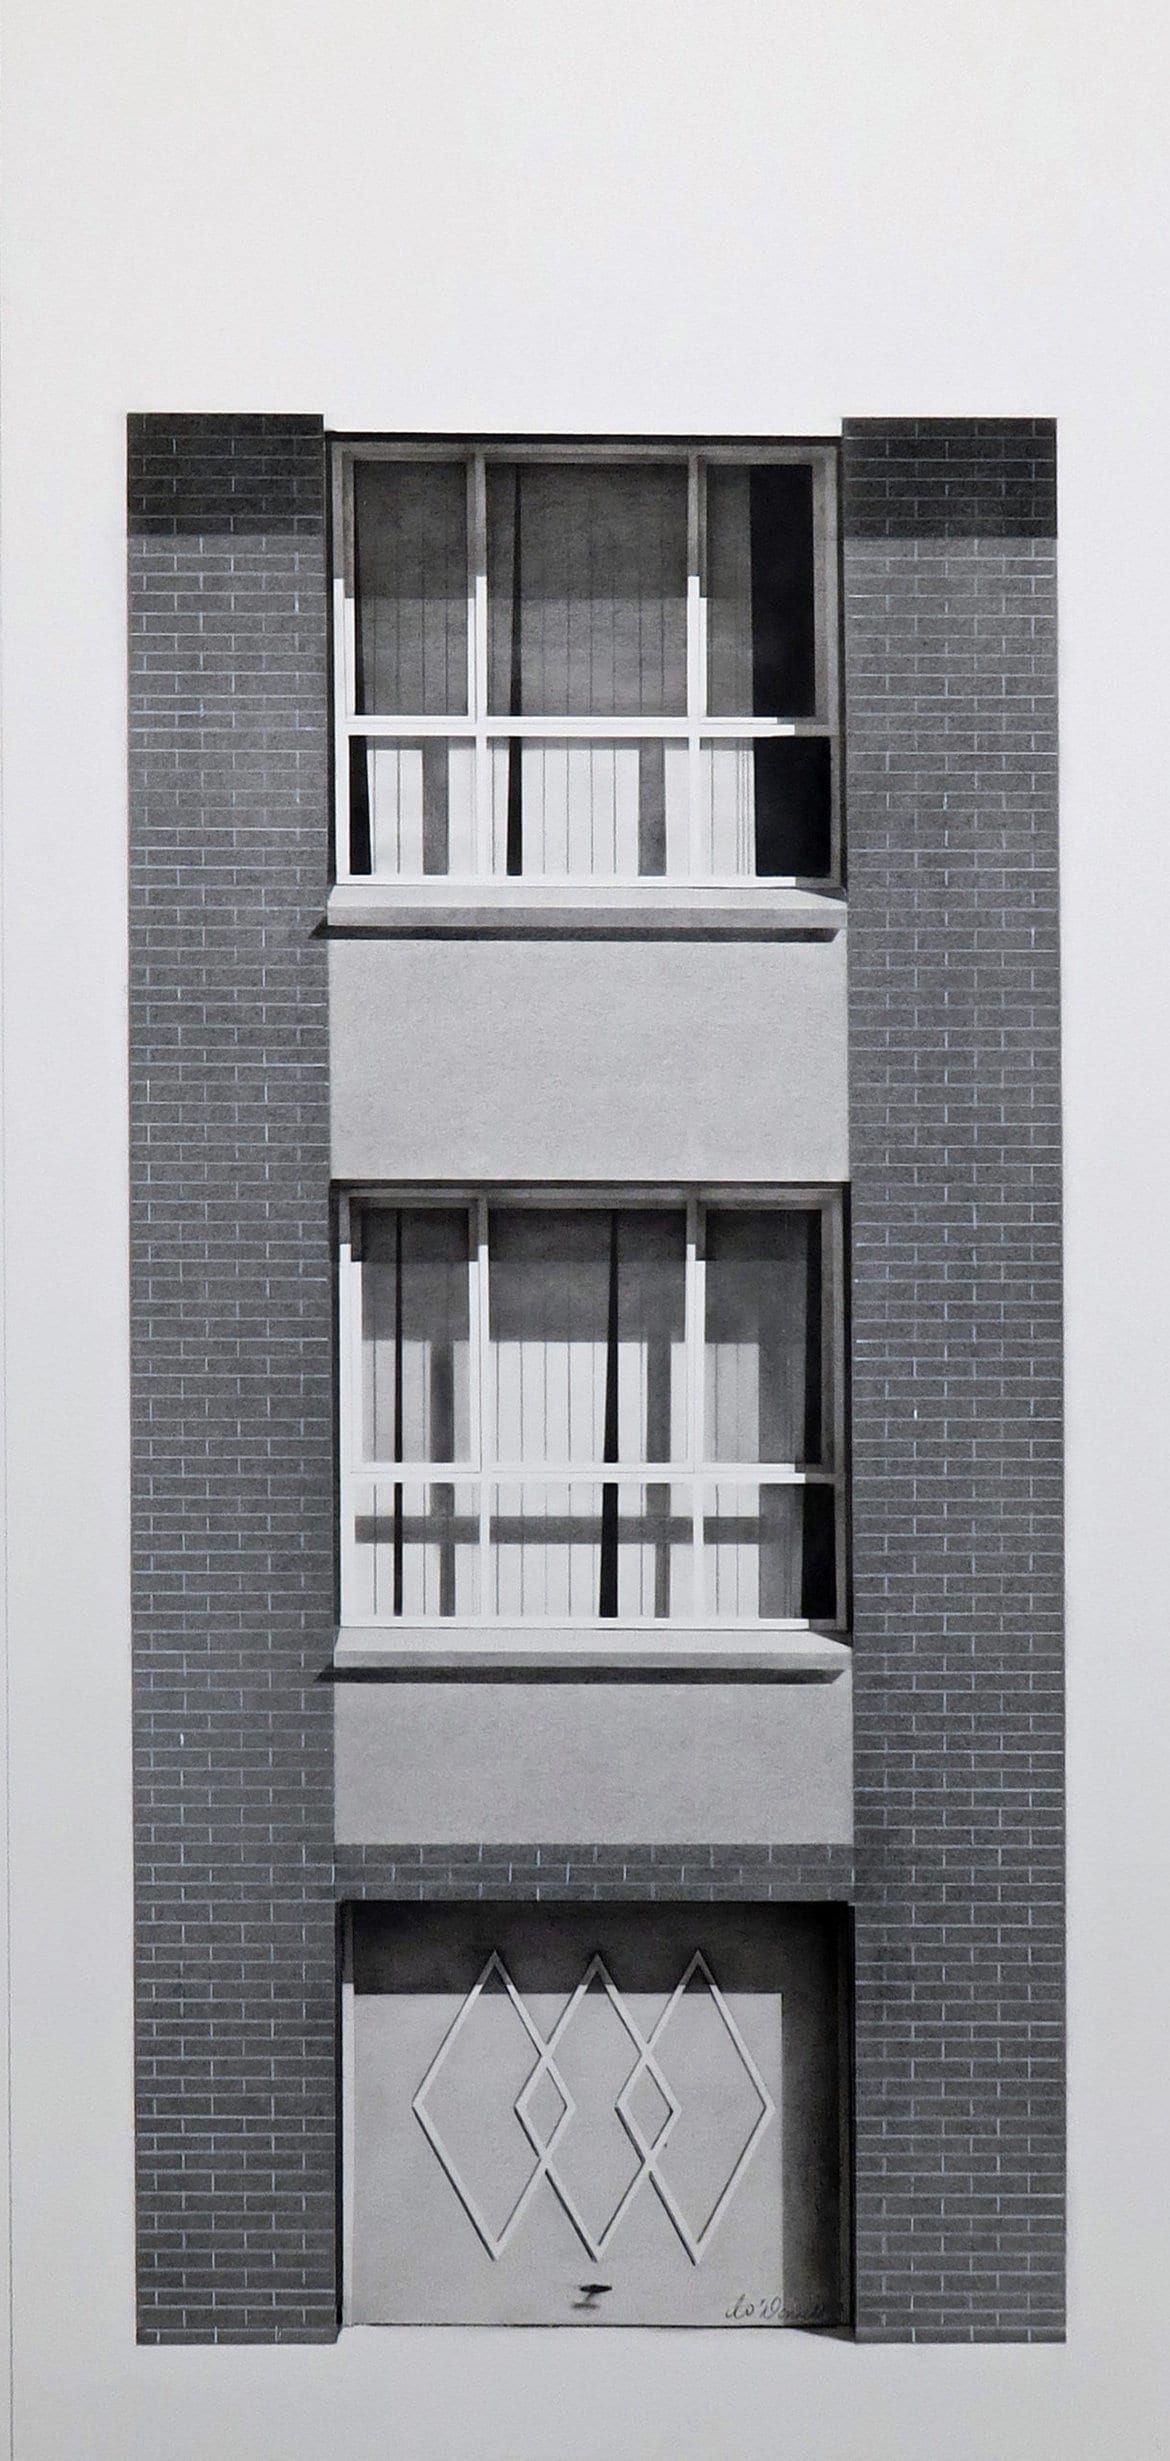 'Bigge Court', 2022, charcoal and graphite on paper, 62 x 34, framed